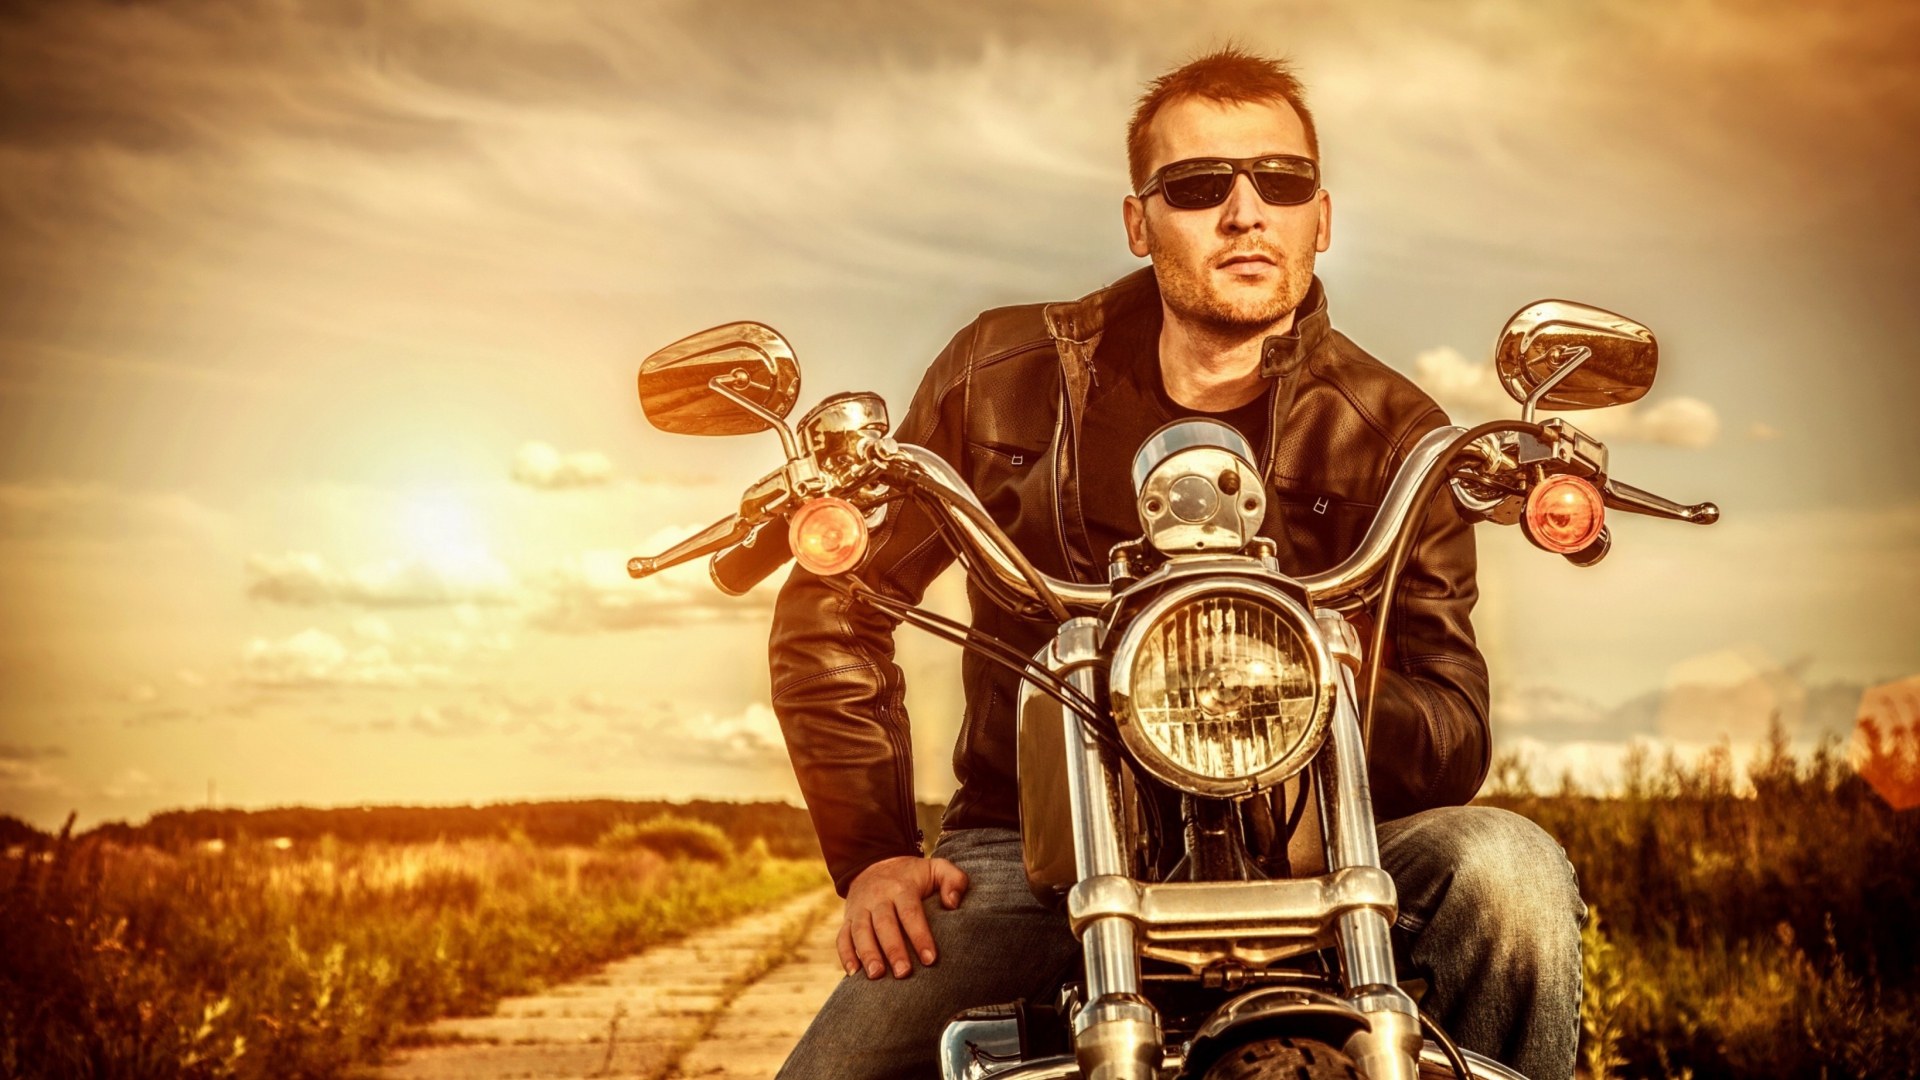 Motorcycle Driver wallpaper 1920x1080